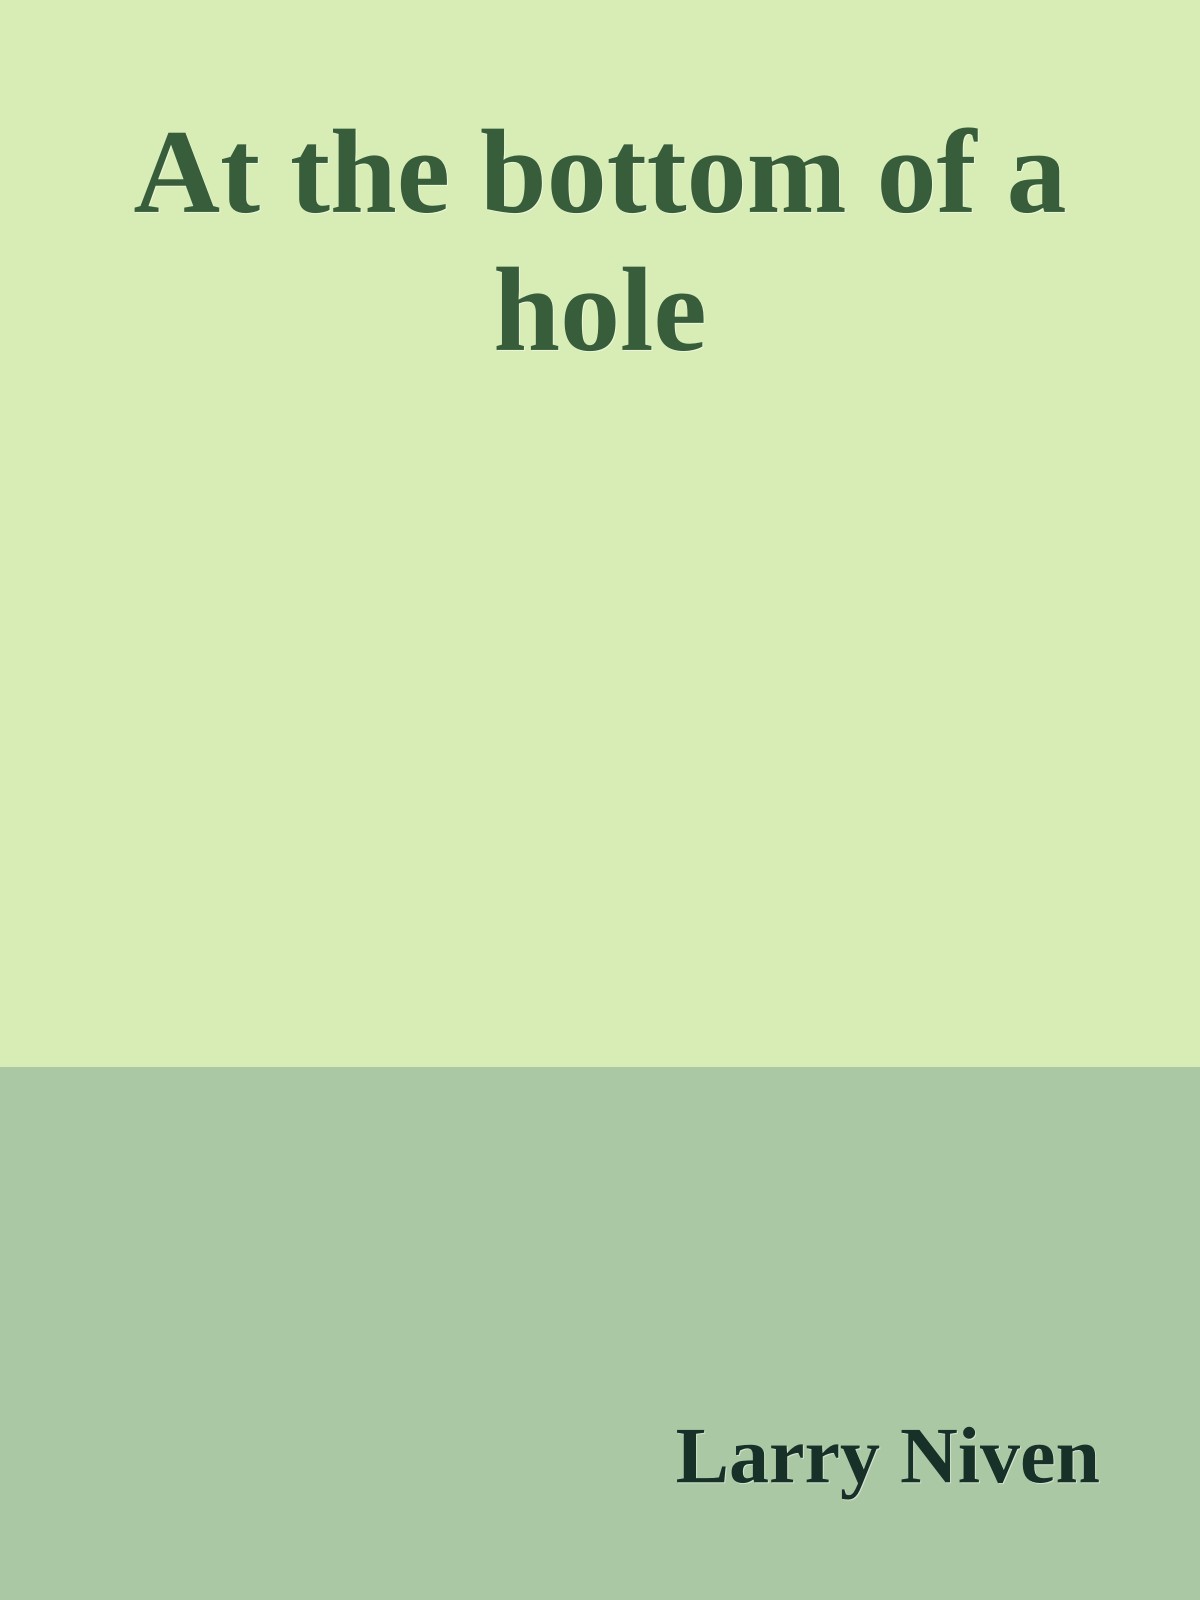 At the bottom of a hole